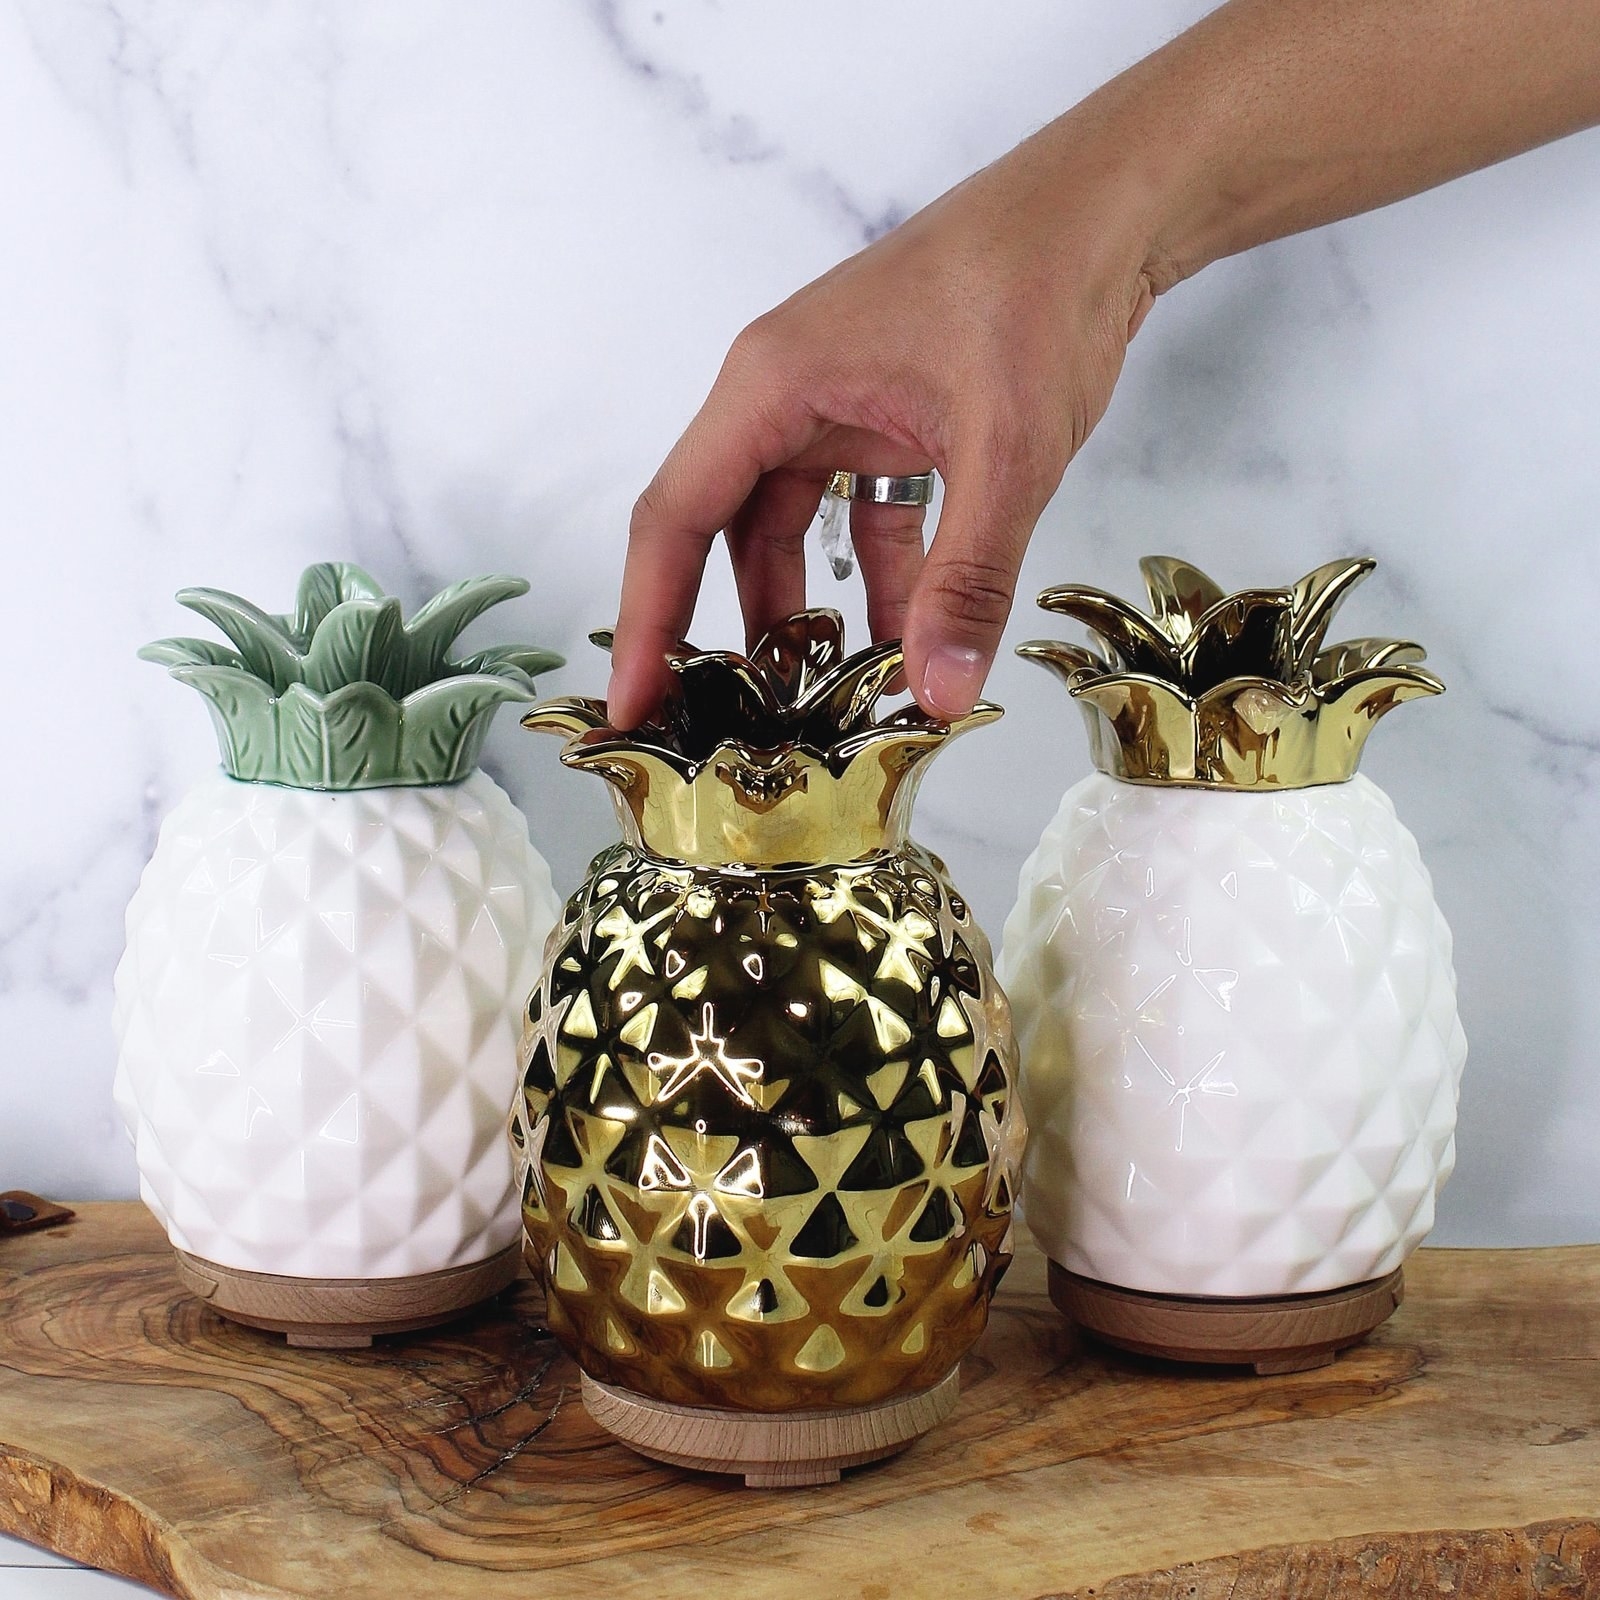 Three pineapple-shaped diffusers in different color options